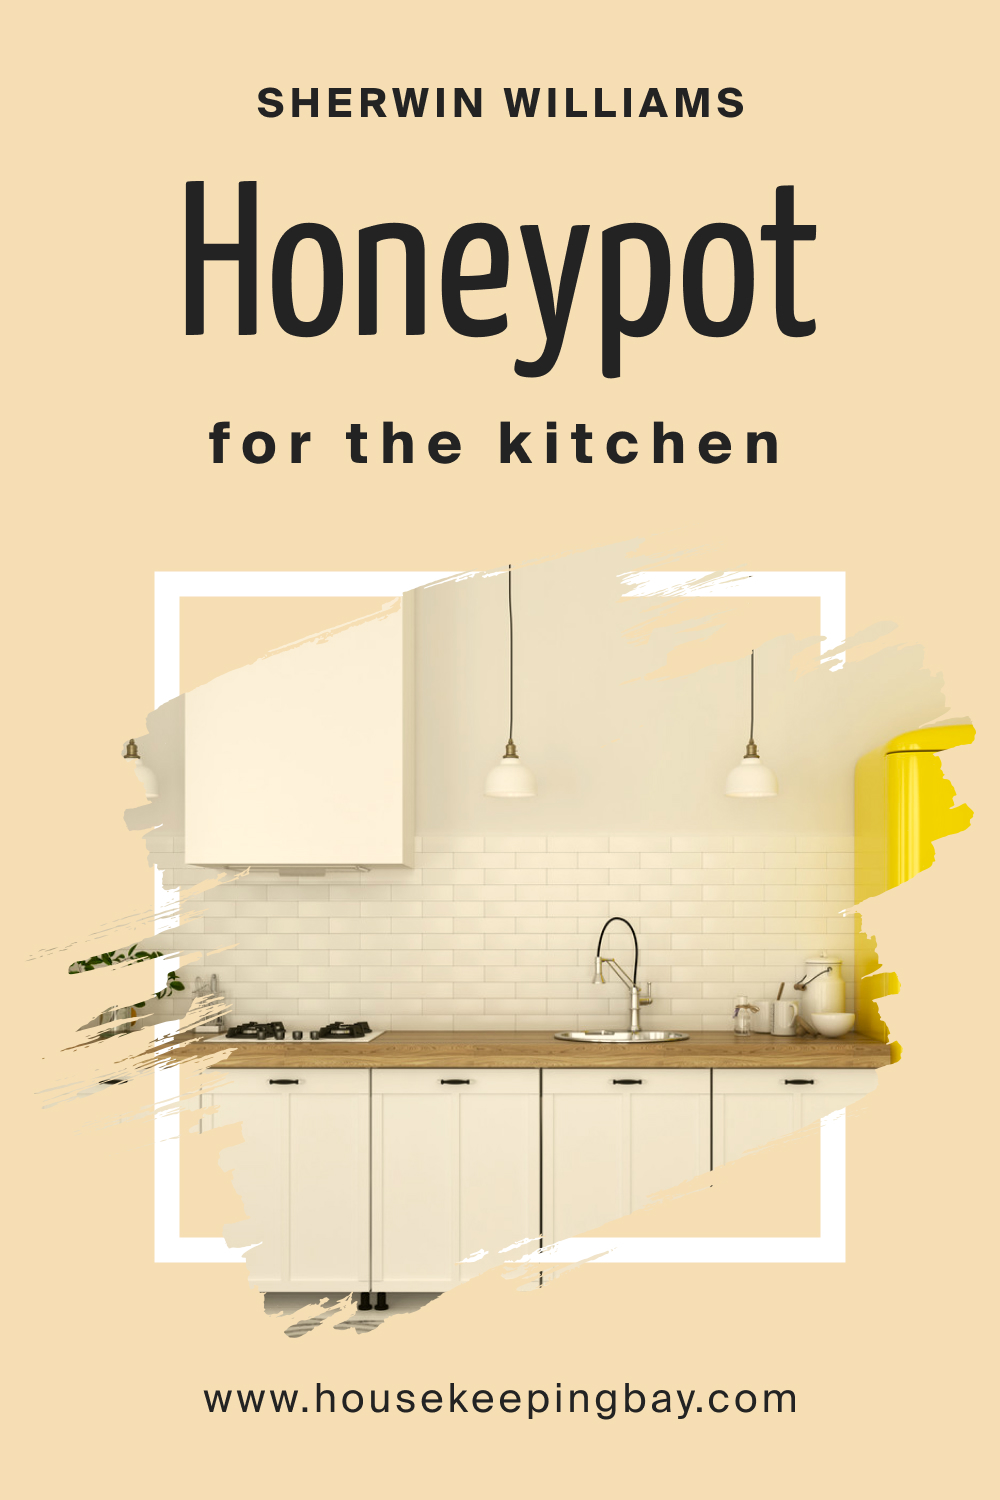 Sherwin Williams. SW 9663 Honeypot For the Kitchens